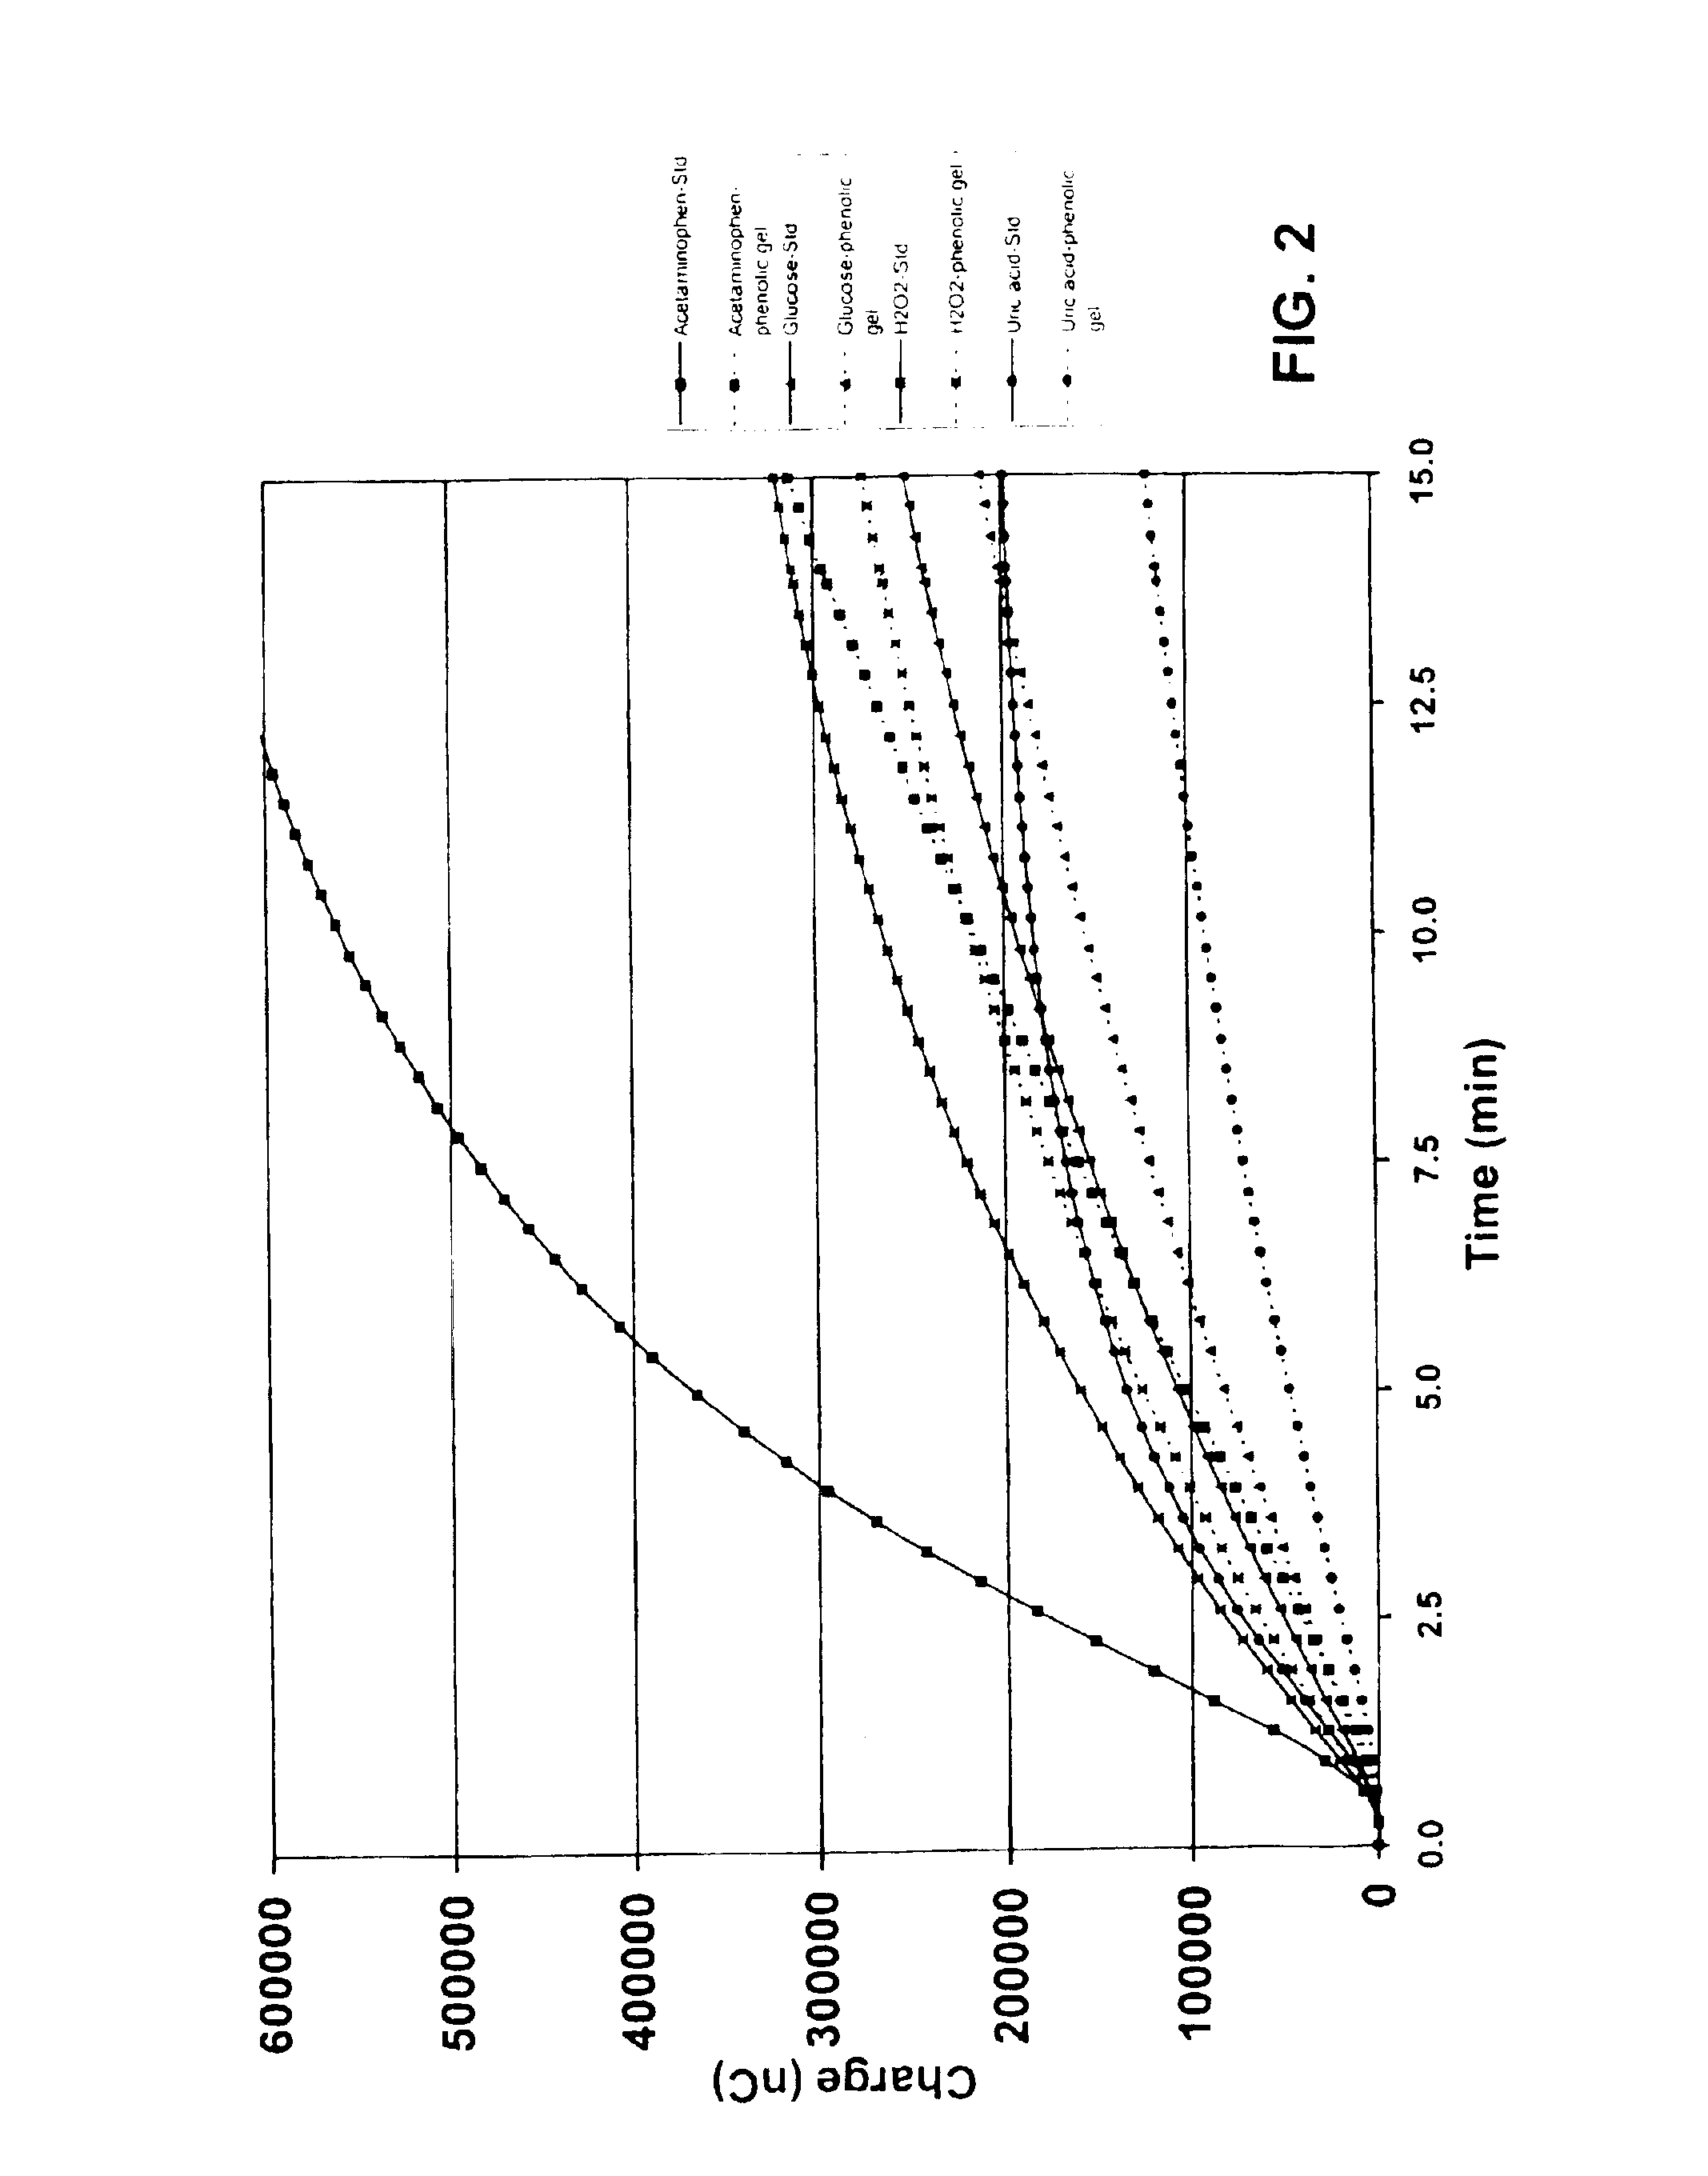 Glucose measuring assembly with a hydrogel